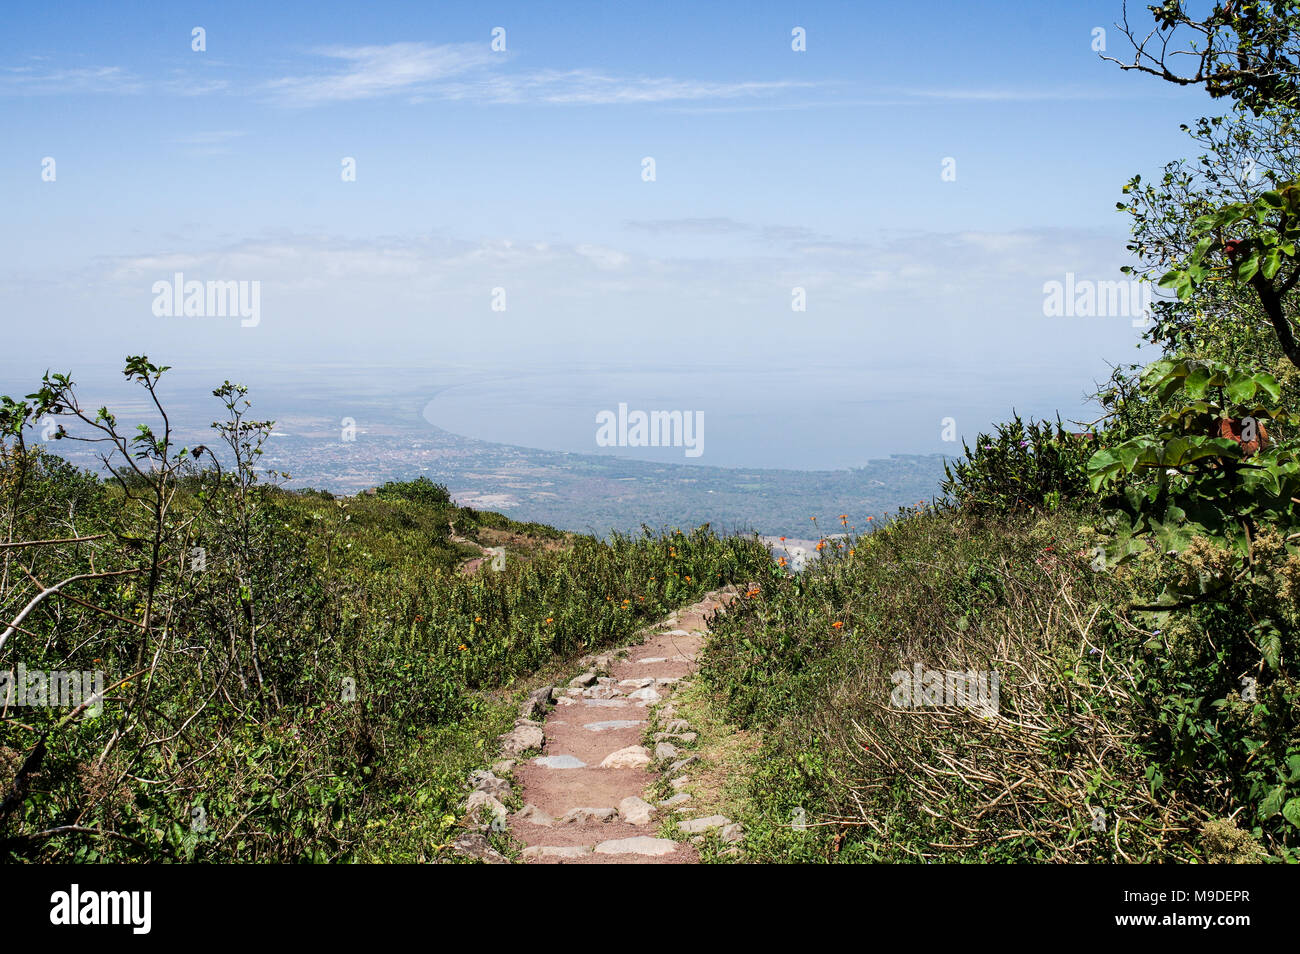 Beautiful views from the top of Mombacho volcano, with the Islets of Granada and lake Nicaragua visible in the distance - Nicaragua, Central America Stock Photo